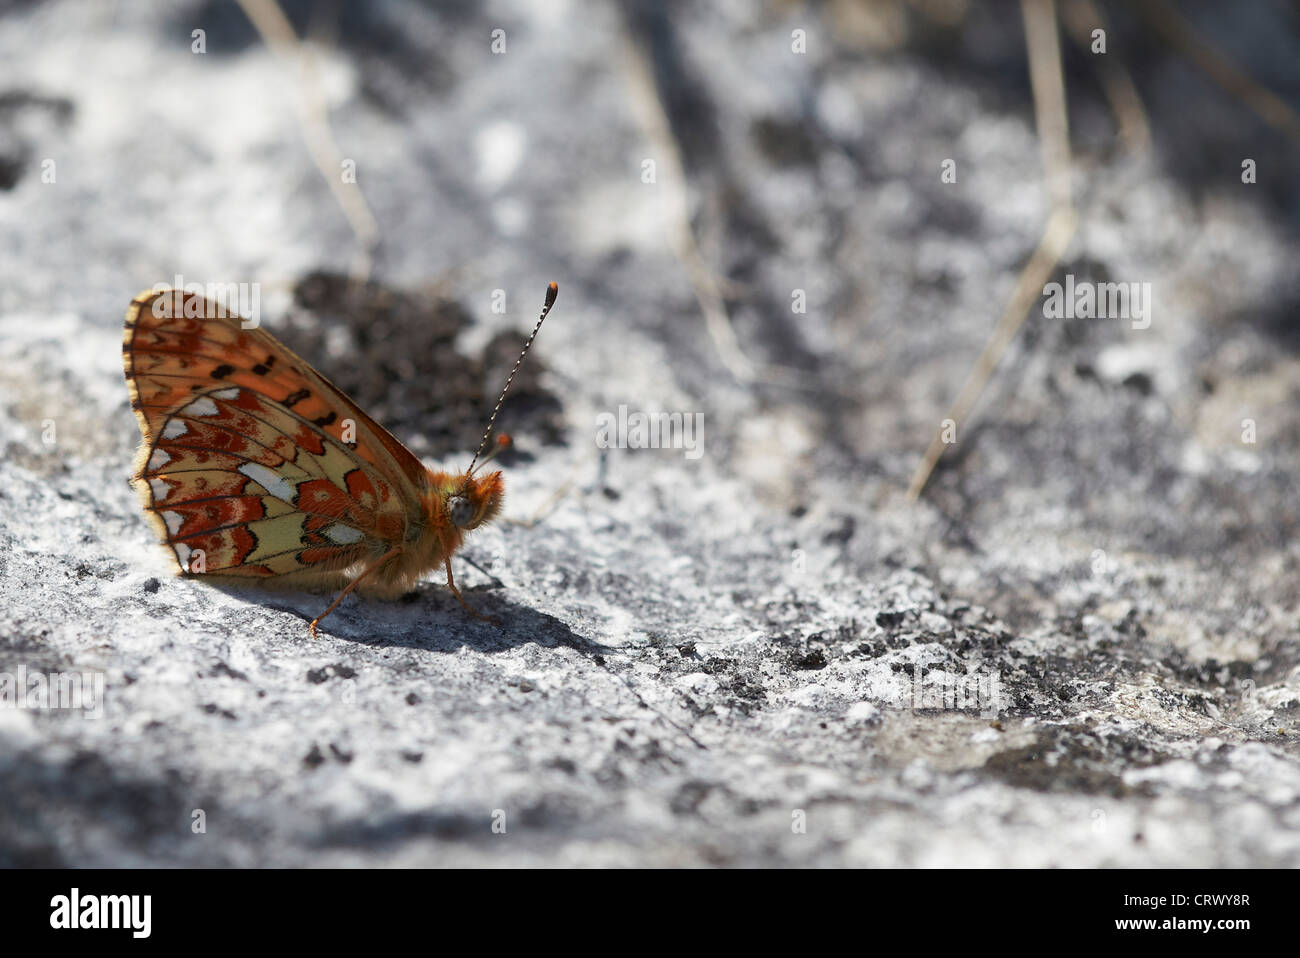 Pearl bordered Fritillary, Boloria euphrosyne, resting on the ground at Gait Barrows nature reserve, UK. Stock Photo